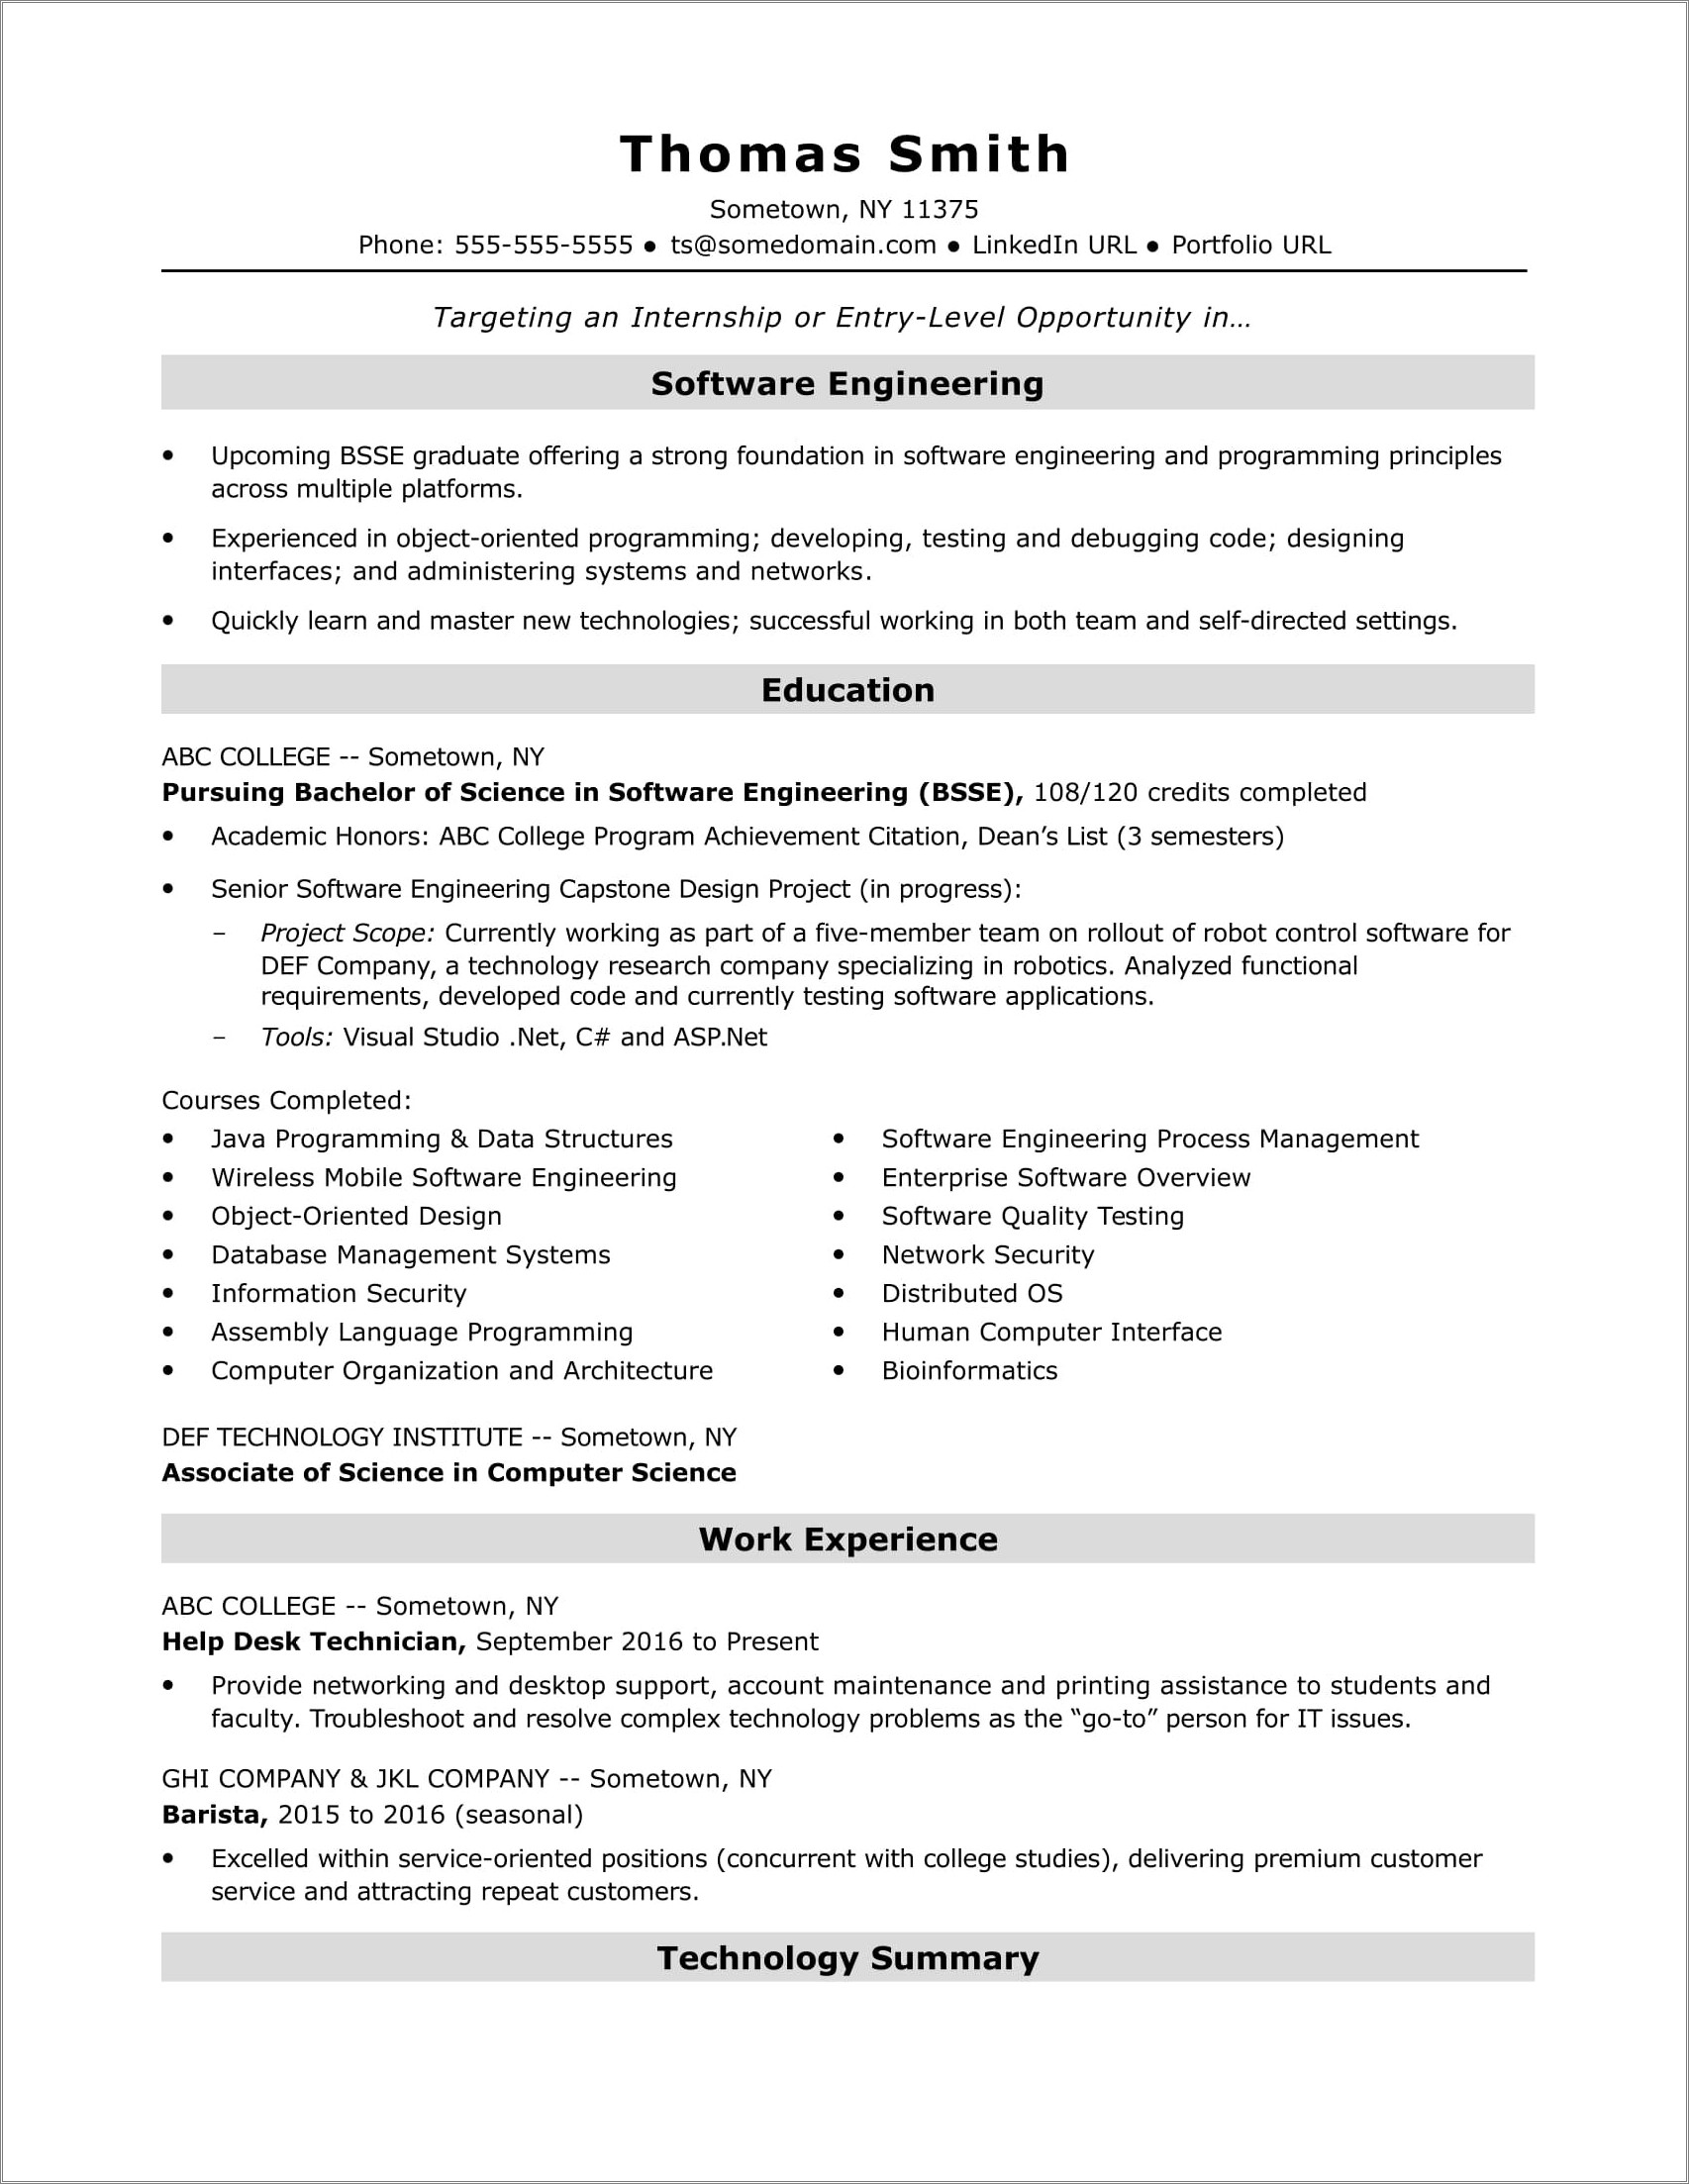 Sample Resume Summary For College Student